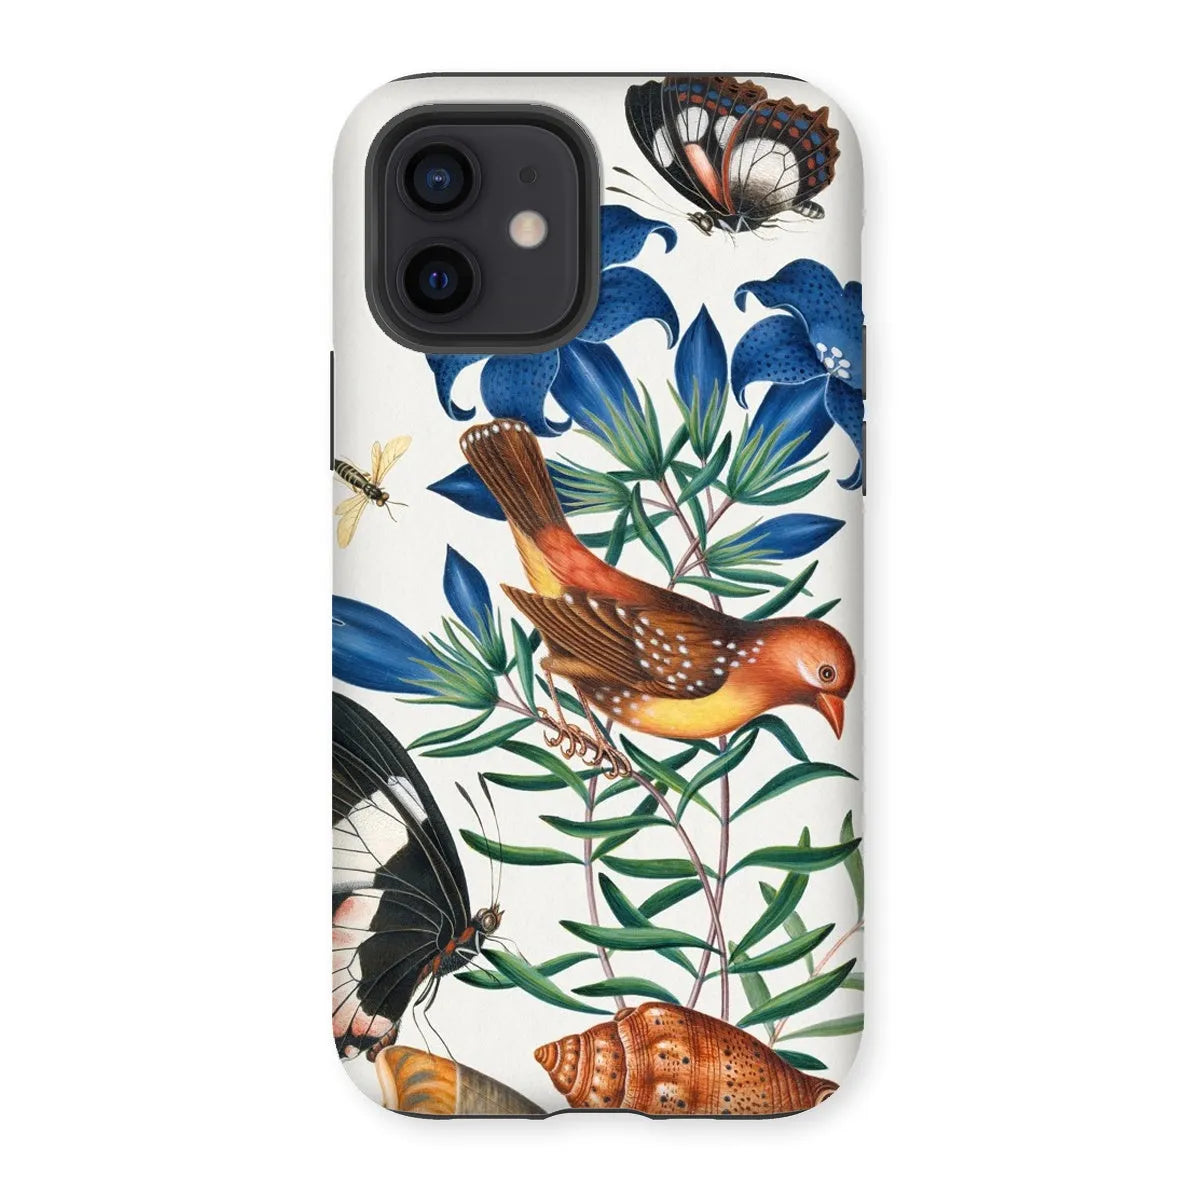 Avadavat Gentian Sawfly Swallowtail And Shells Phone Case - James Bolton - Iphone 12 / Matte - Mobile Phone Cases